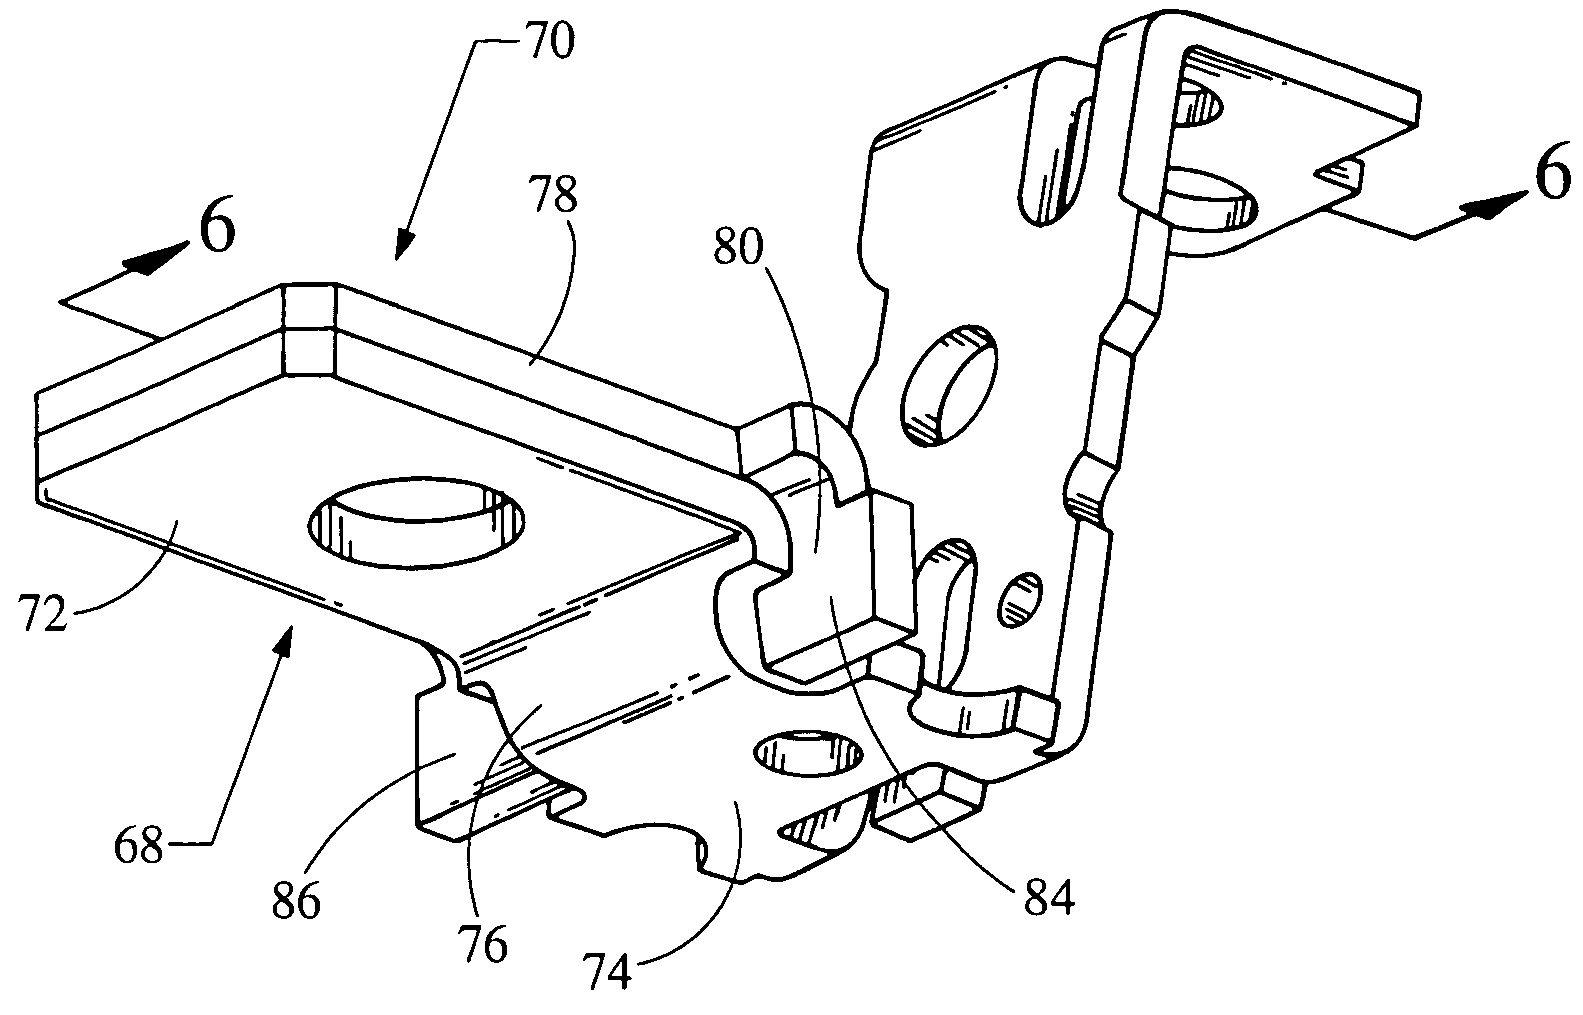 Terminal support for a circuit breaker trip unit